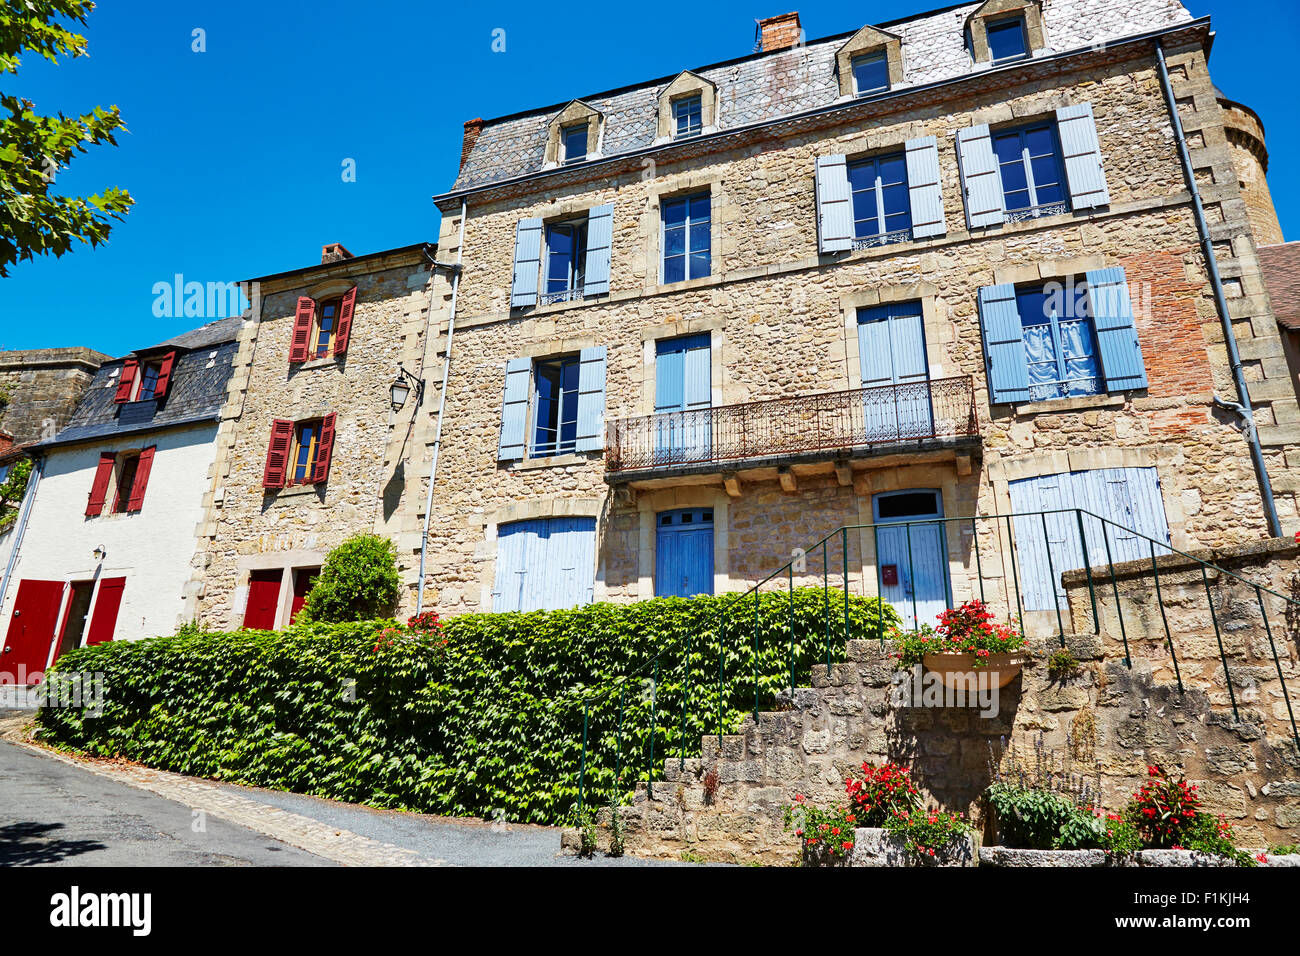 Buildings with colorful shutters in the village of Hautefort, Aquitaine, Dordogne, France. Stock Photo